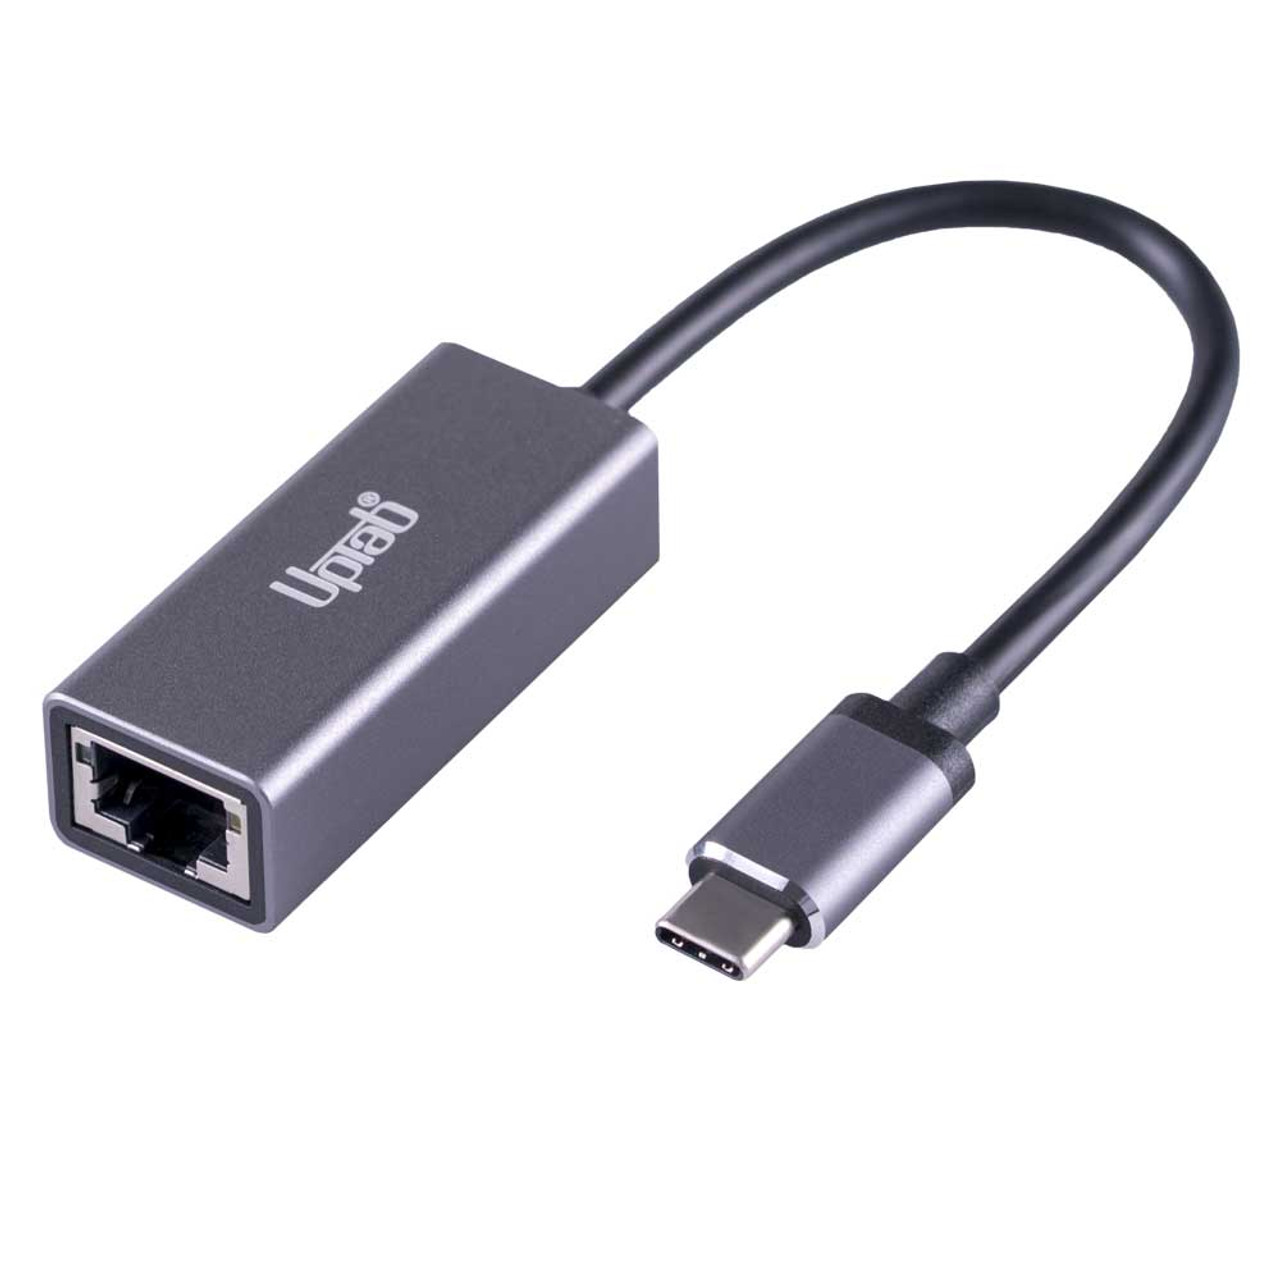 usb 2.0 to ethernet adapter speed